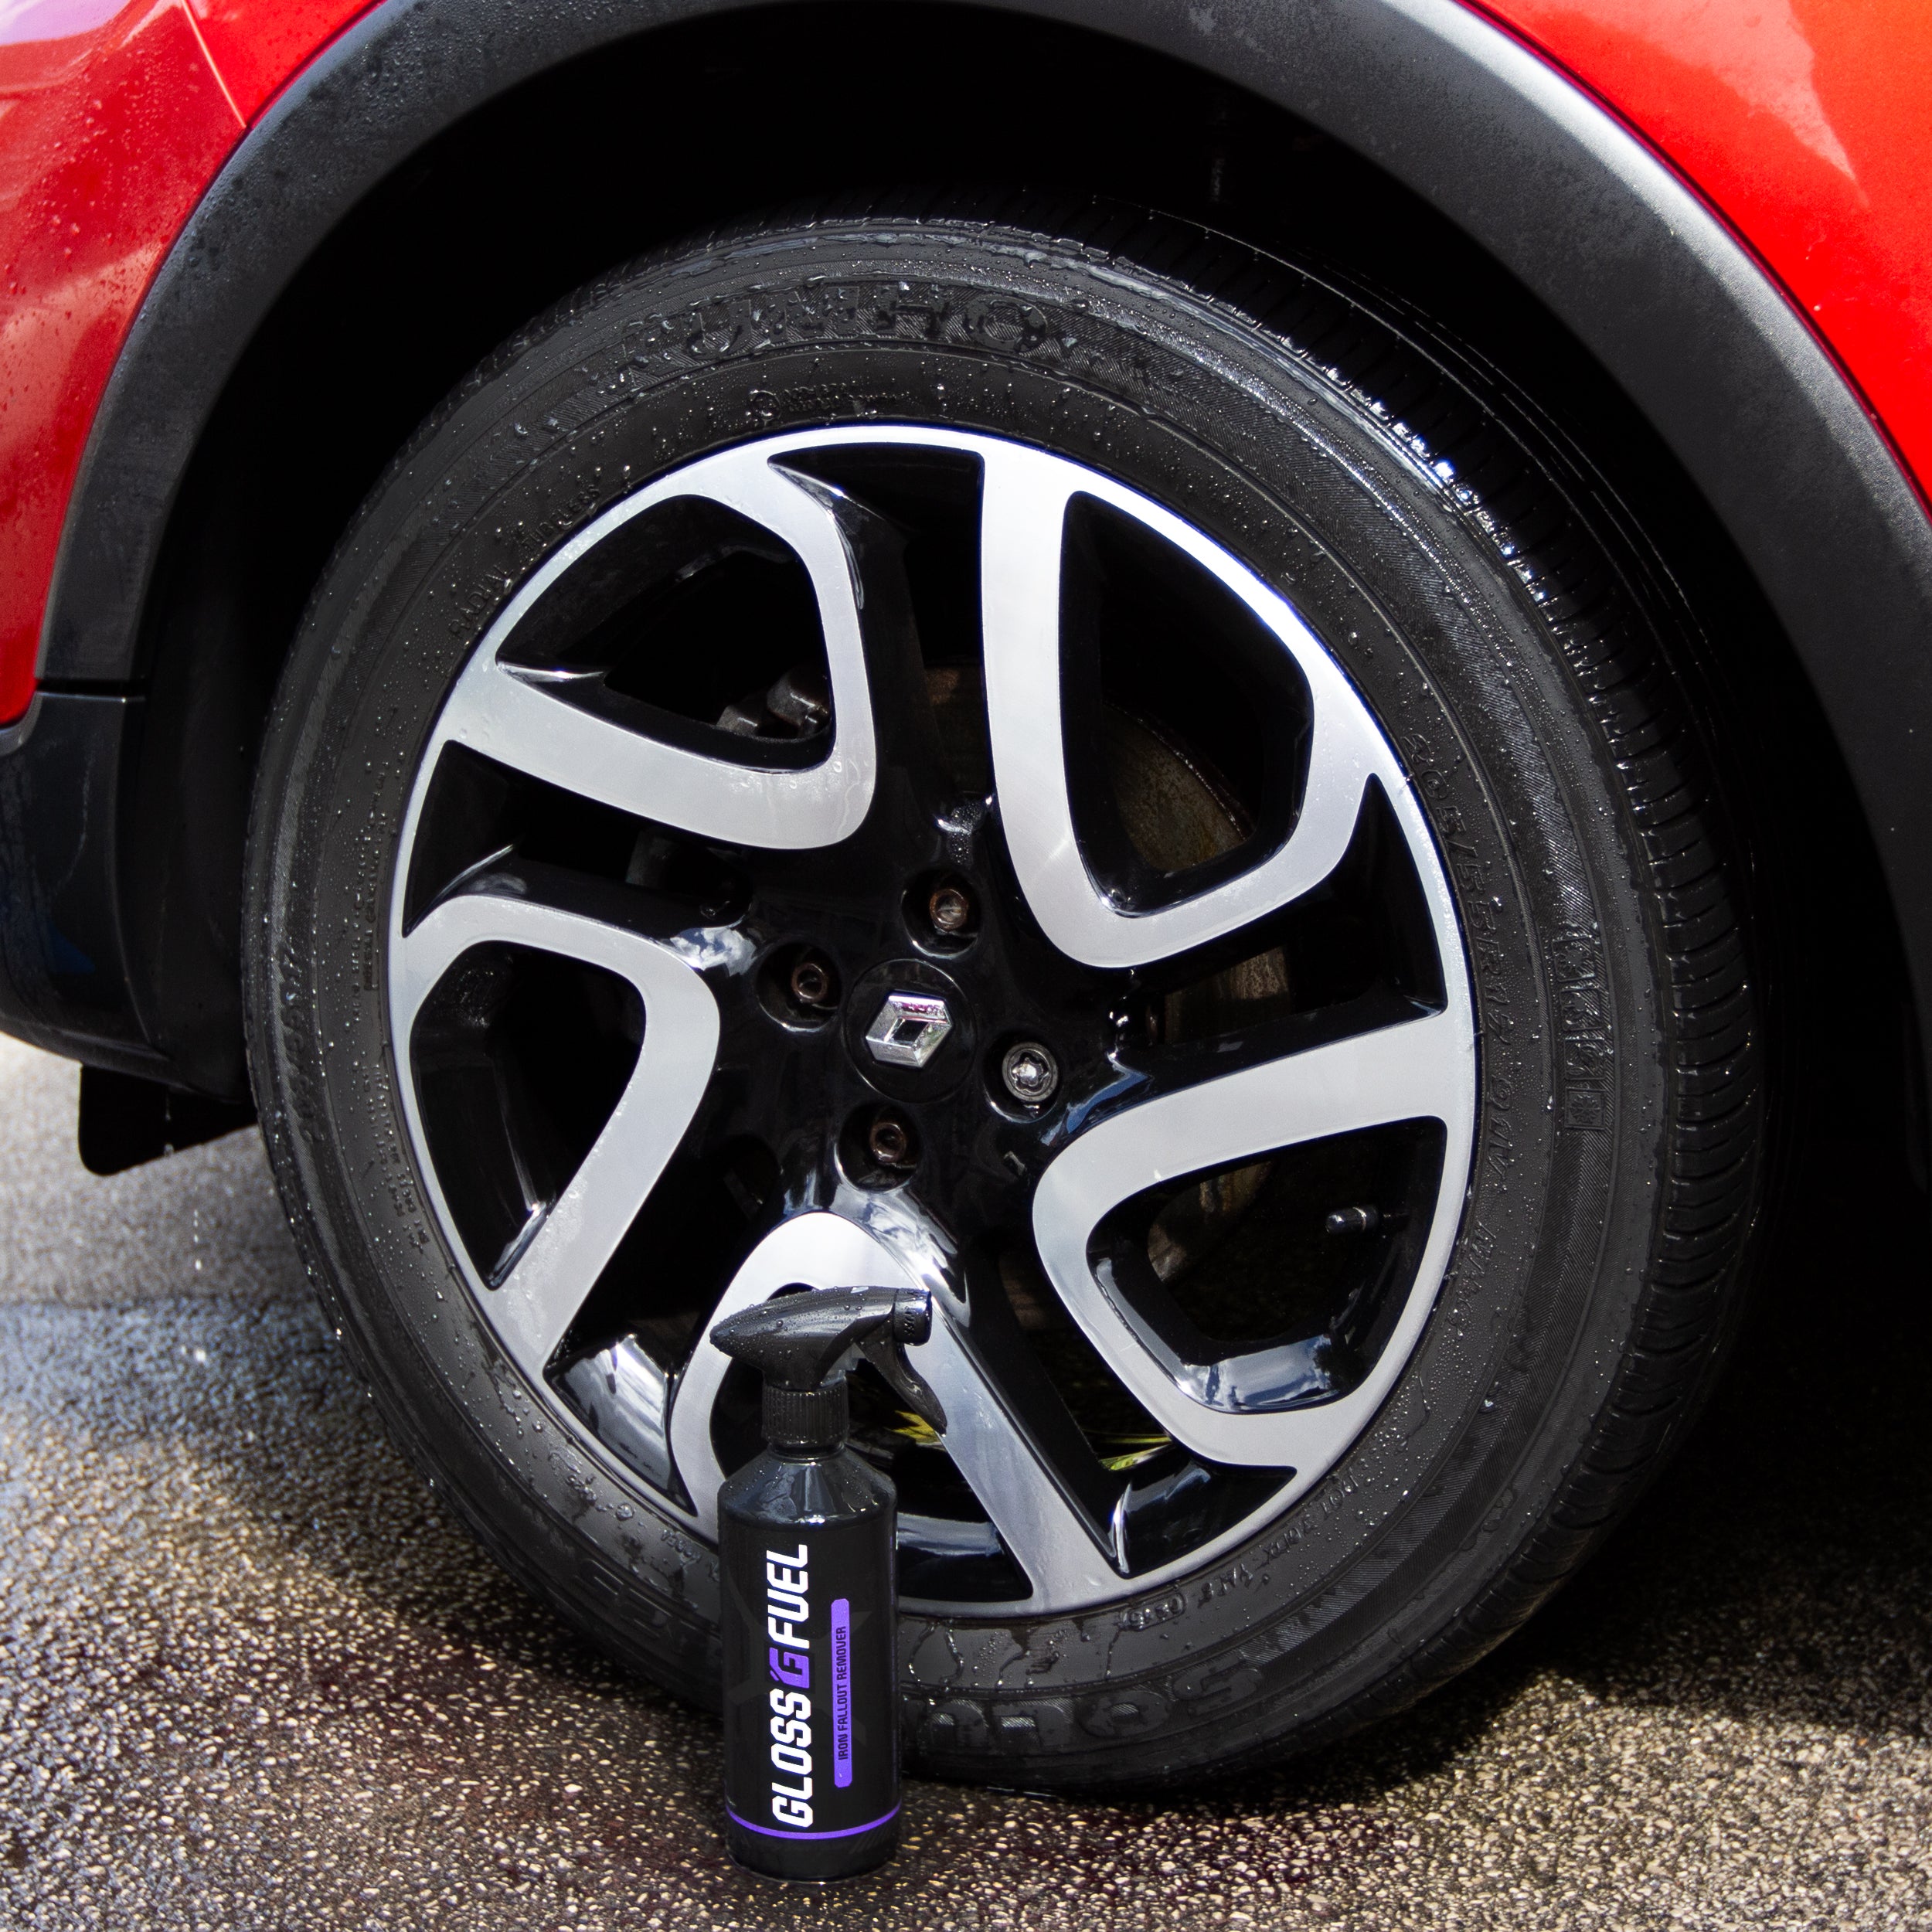 Gloss Fuel Iron Fallout Remover bottle next to a freshly cleansed alloy wheel